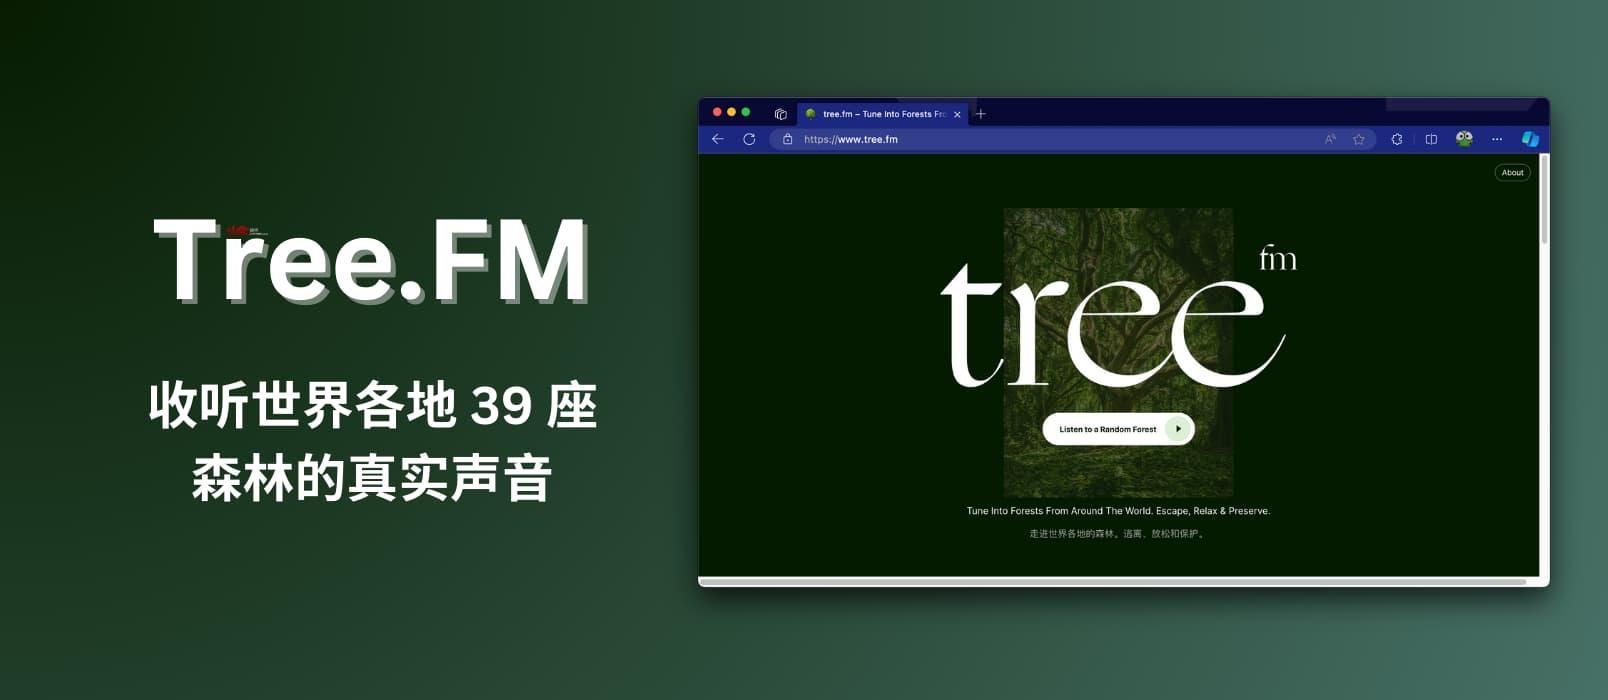 Tree.FM - Listen to the Sounds of Forests Around the World | 39 Real Forest Recordings 1